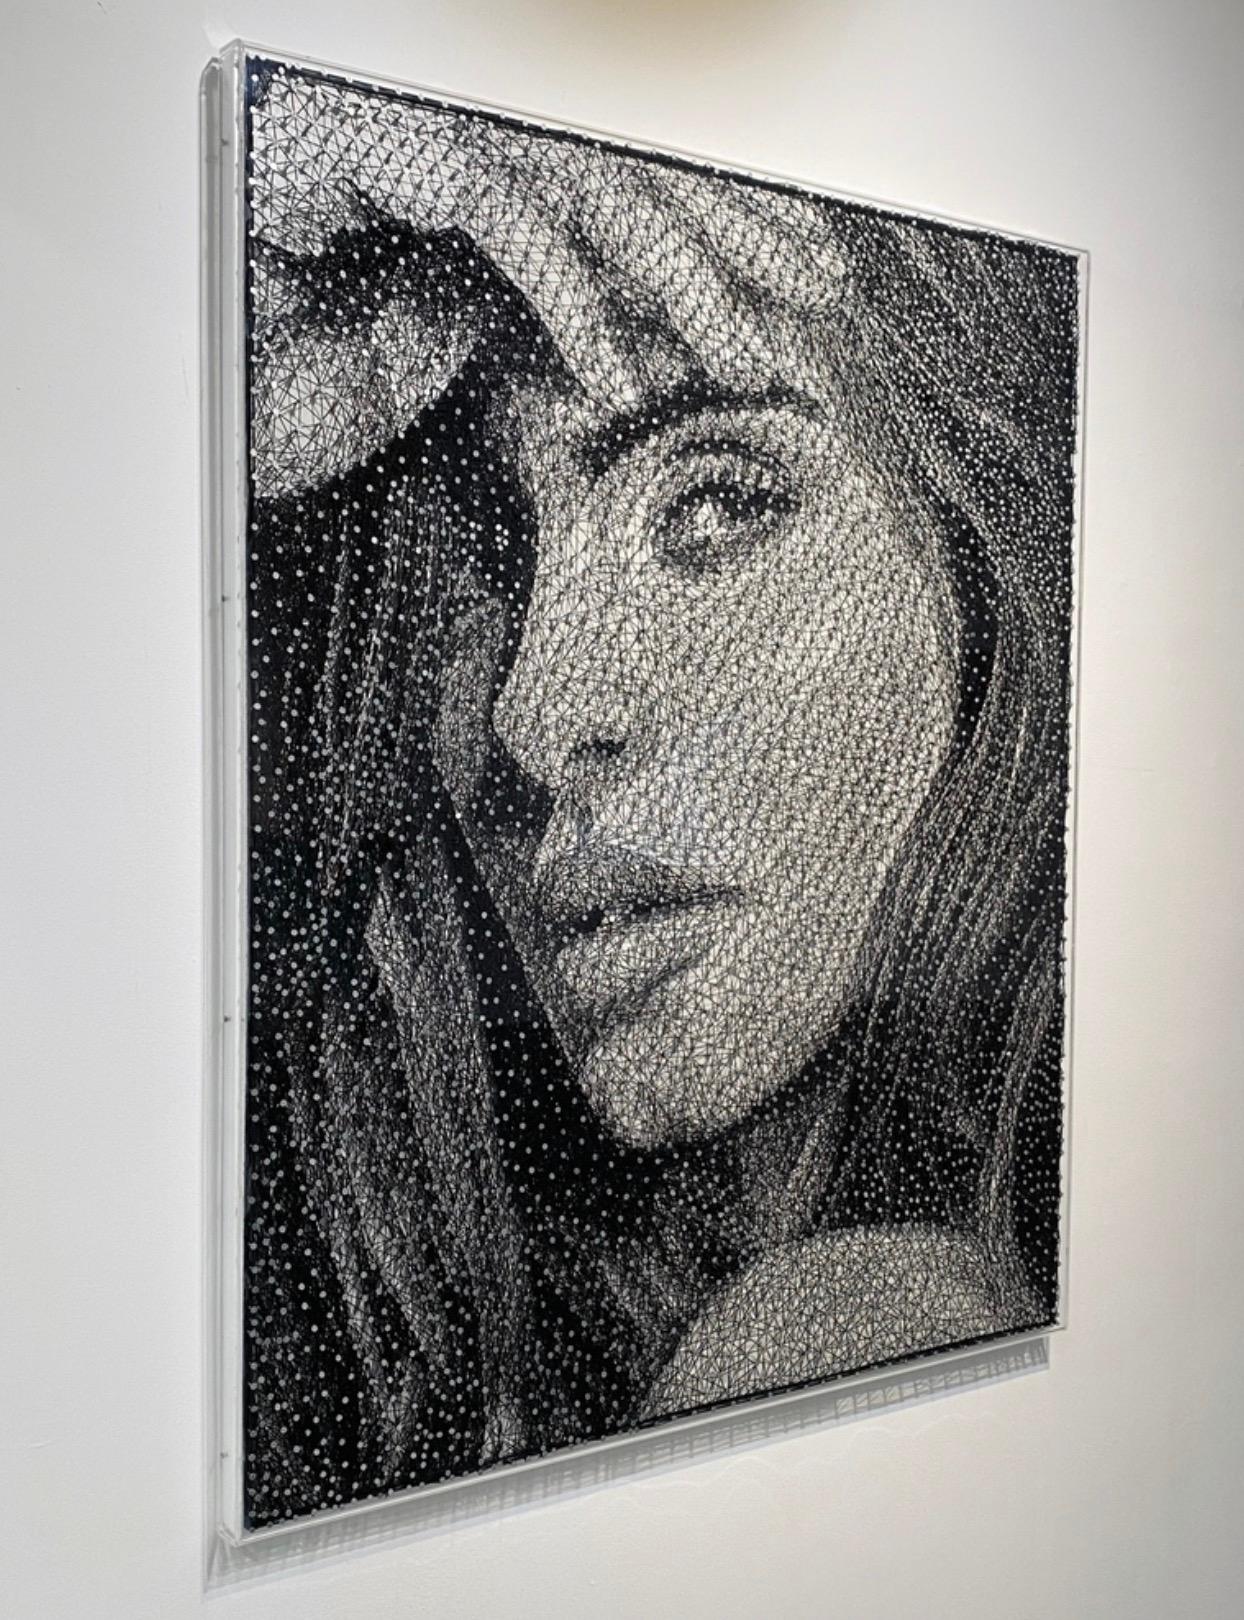 Thread is expertly wrapped around embedded nails to create a beautiful portrait of a woman. The distinct medium uses layering and gradients to create a unique sense of depth and texture.

In the latest series, inspired by media, pop culture, and